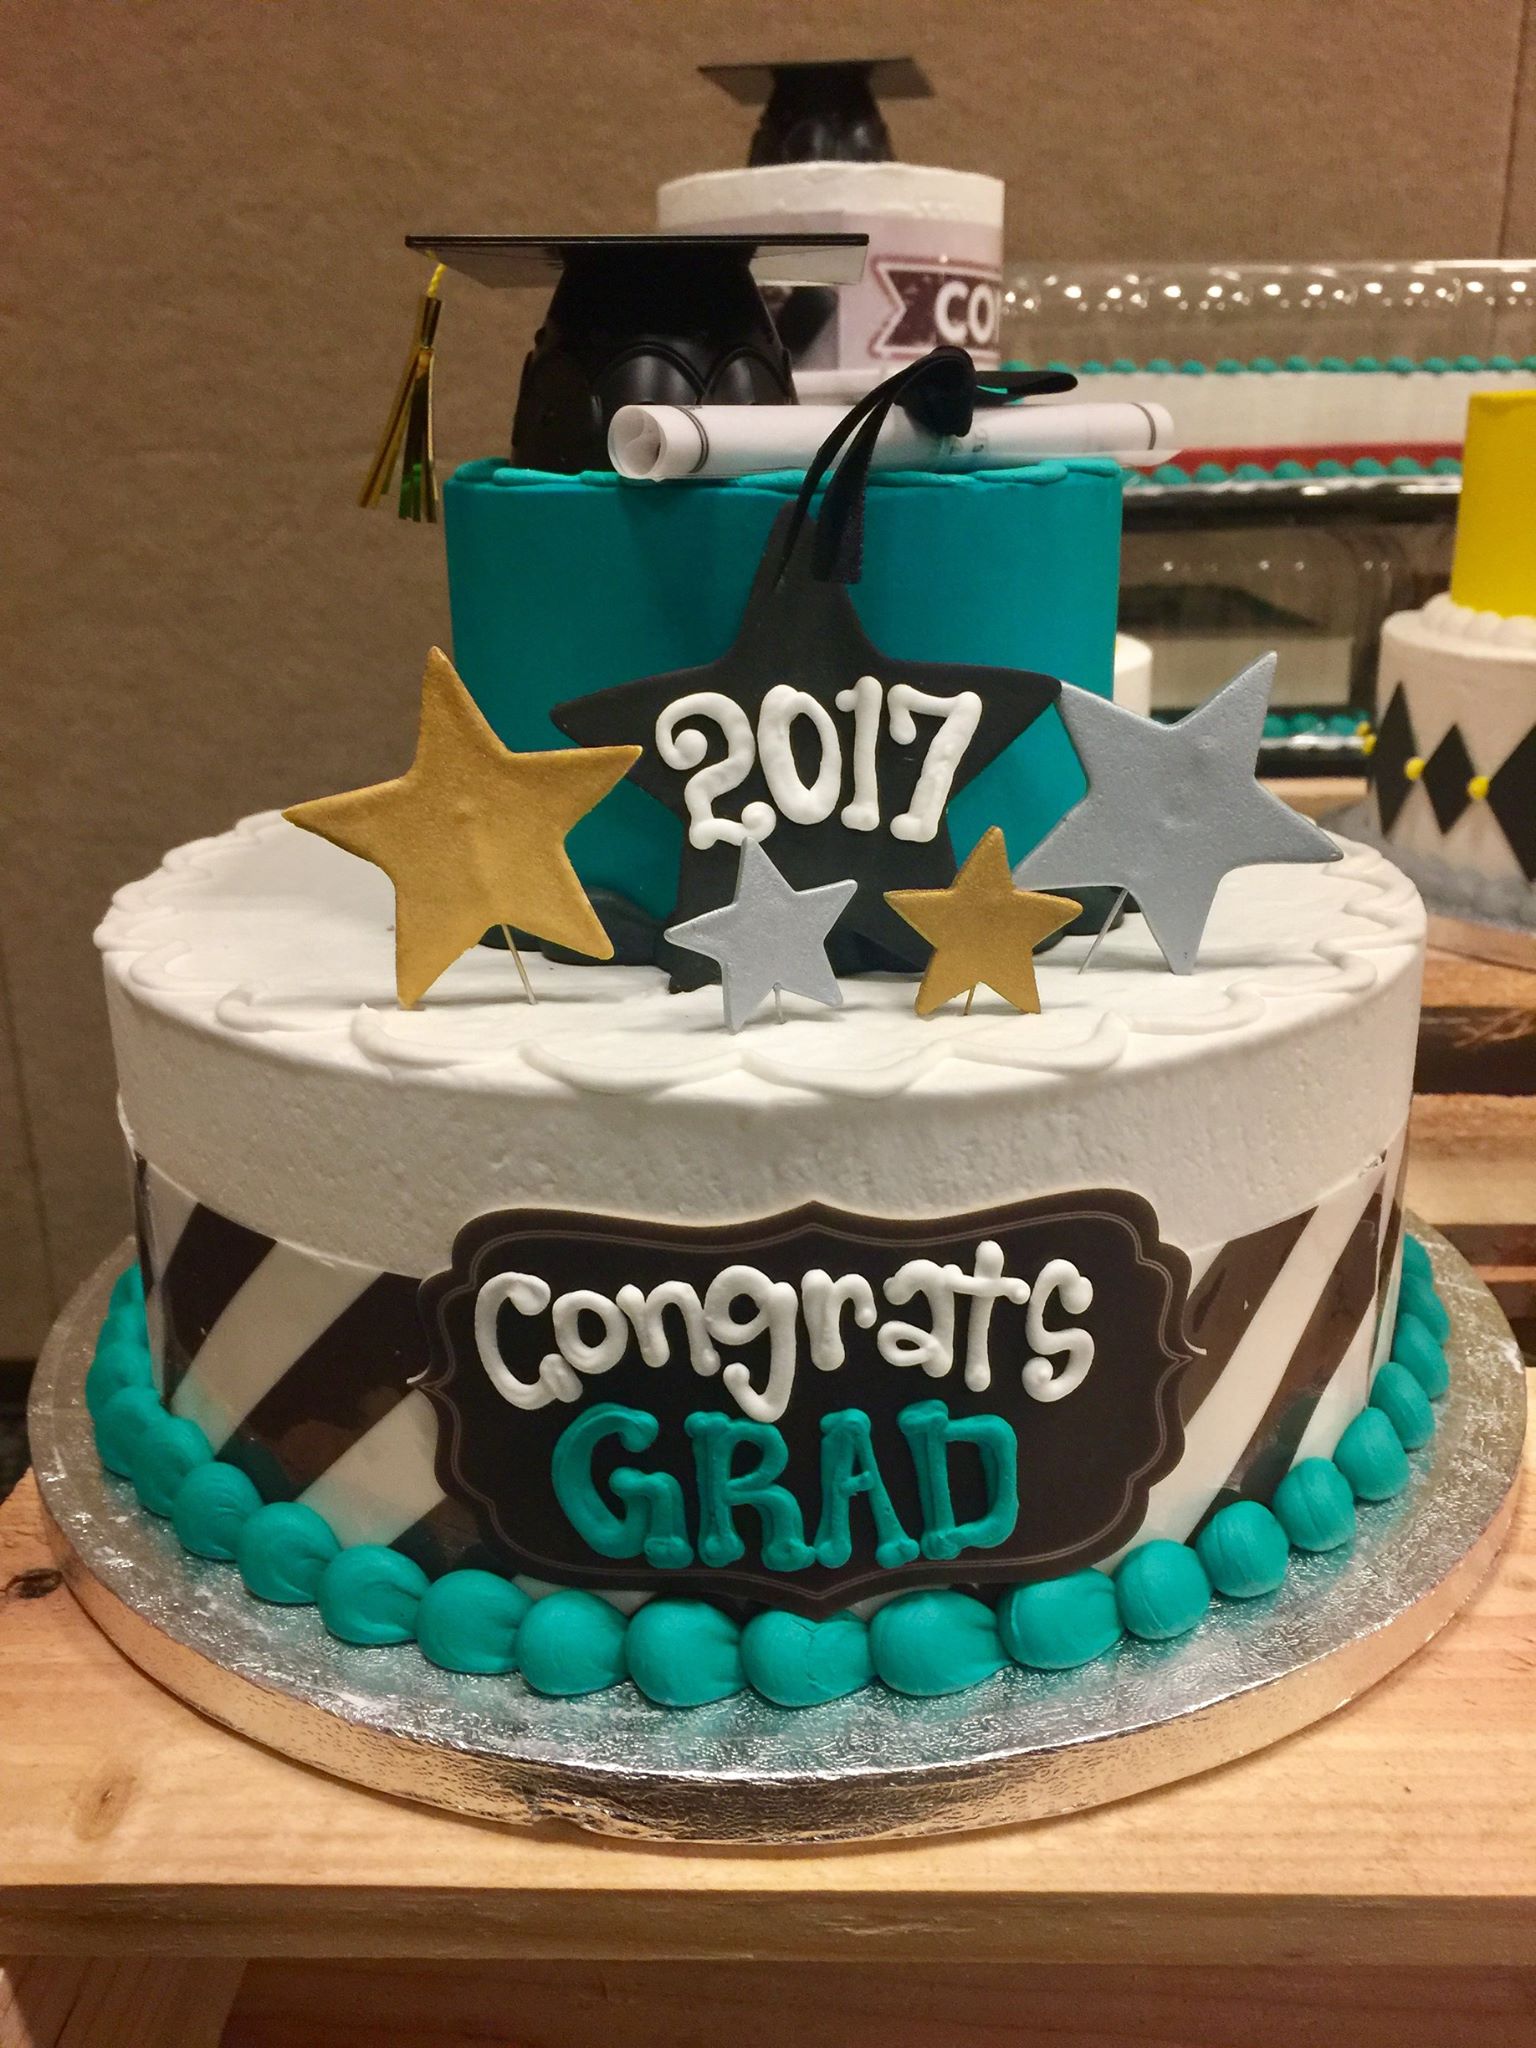 Uživatel Sam's Club na Twitteru: „Congrats graduates! Thanks for trusting  us for your celebrations. Check out our great cake designs in club &  online /Fa2bvfhZAu /rMaRMW6UzA“ / Twitter